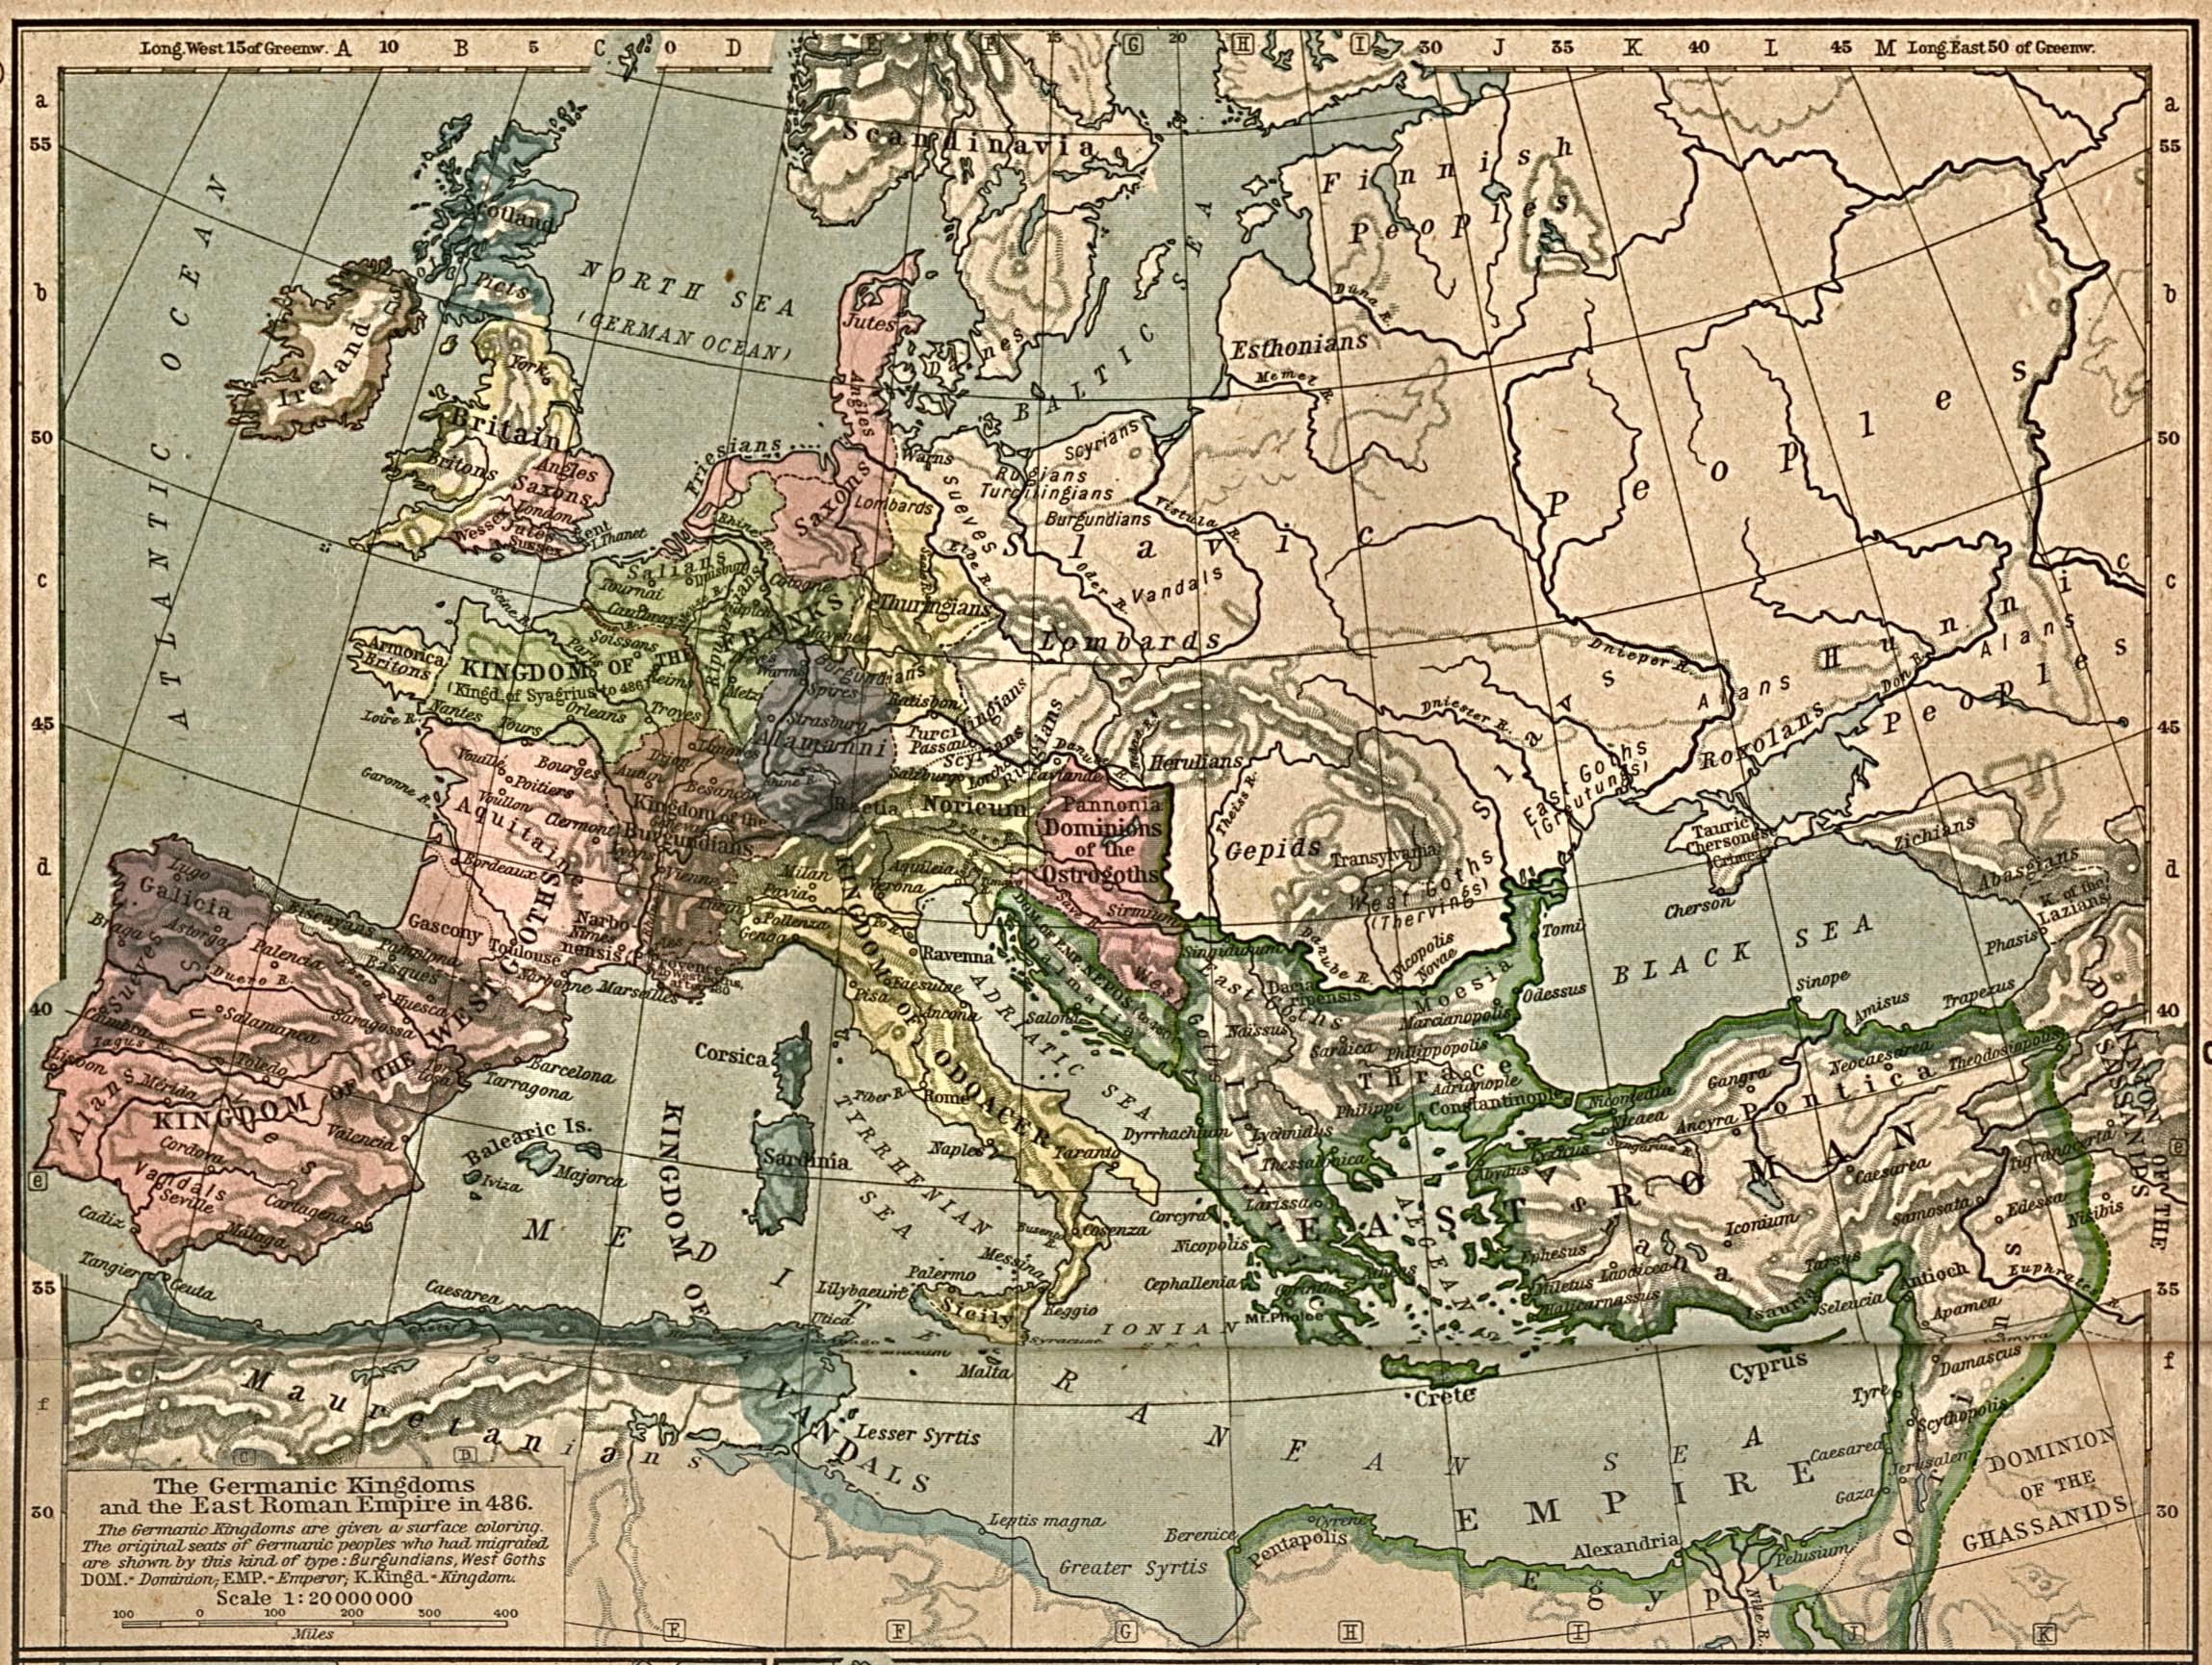 2298x1730 The Germanic Kingdoms and the East Roman Empire 526-600 ...